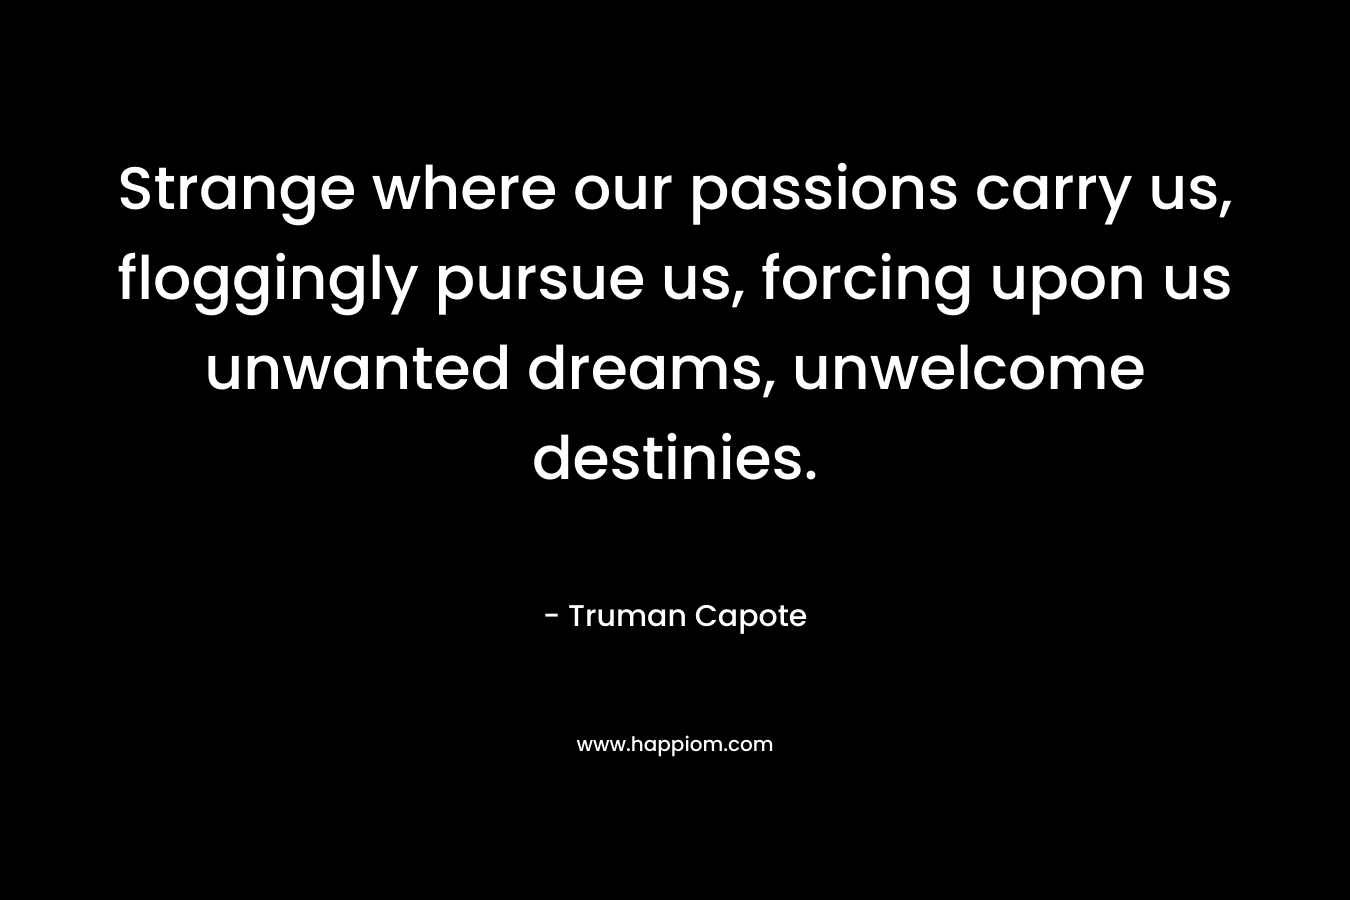 Strange where our passions carry us, floggingly pursue us, forcing upon us unwanted dreams, unwelcome destinies. – Truman Capote